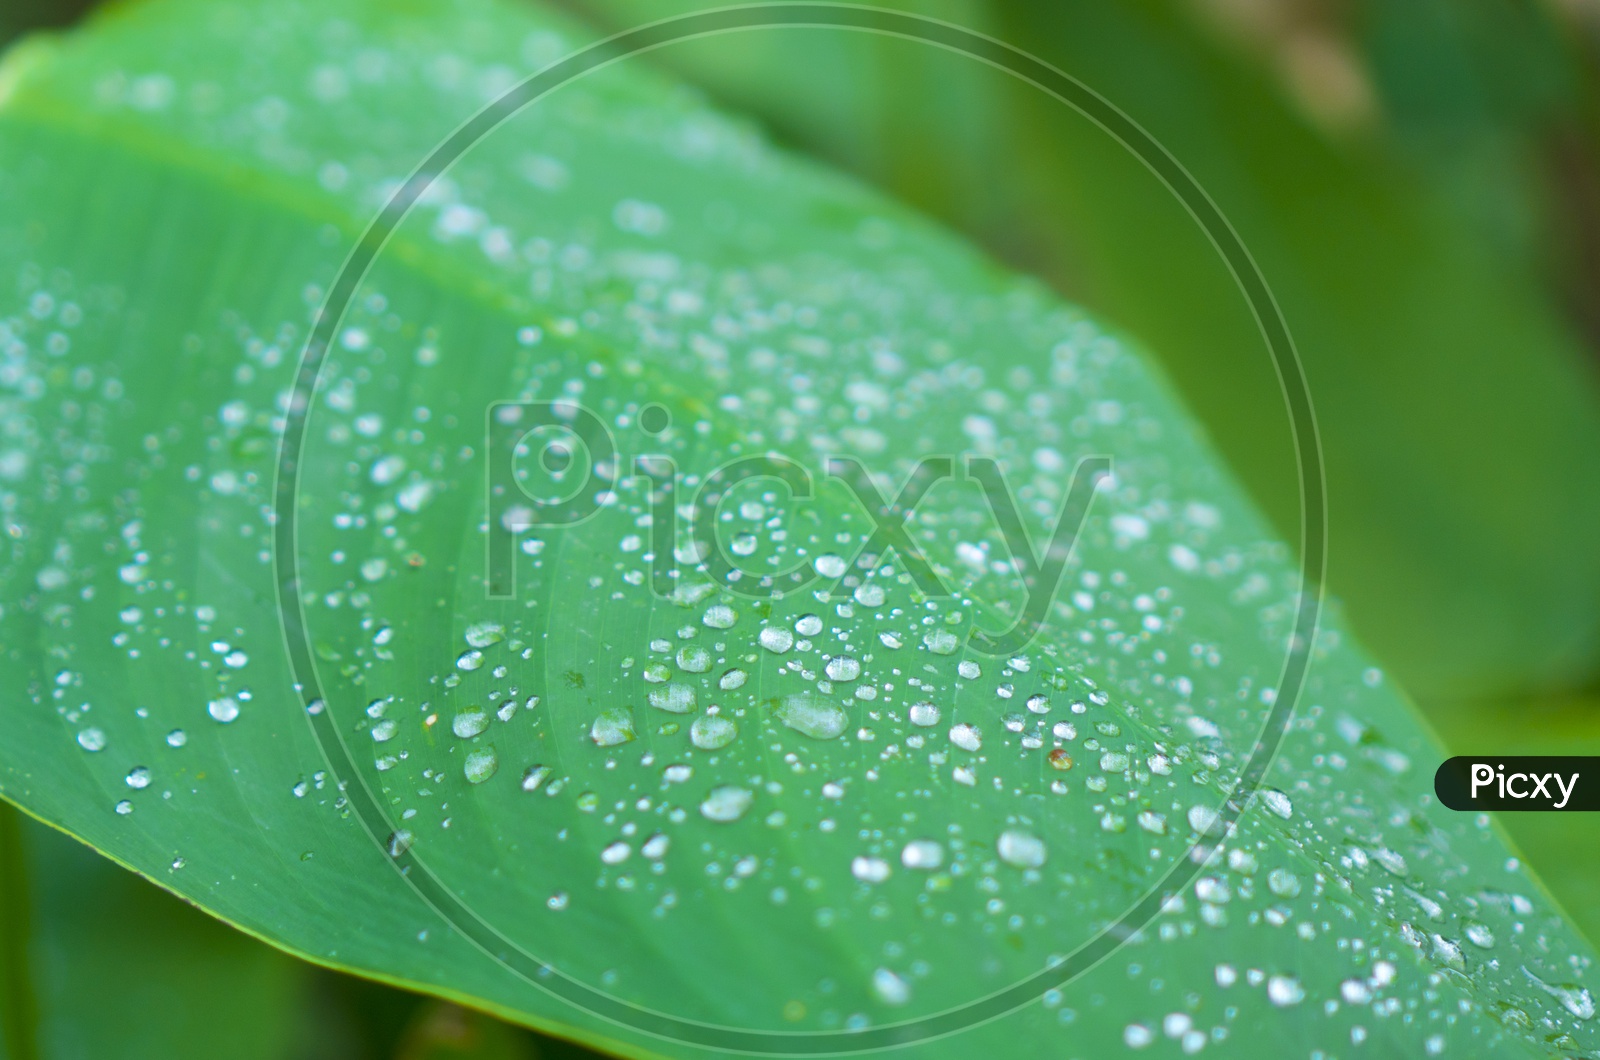 Green Leaf Of a Plant With Water Droplets